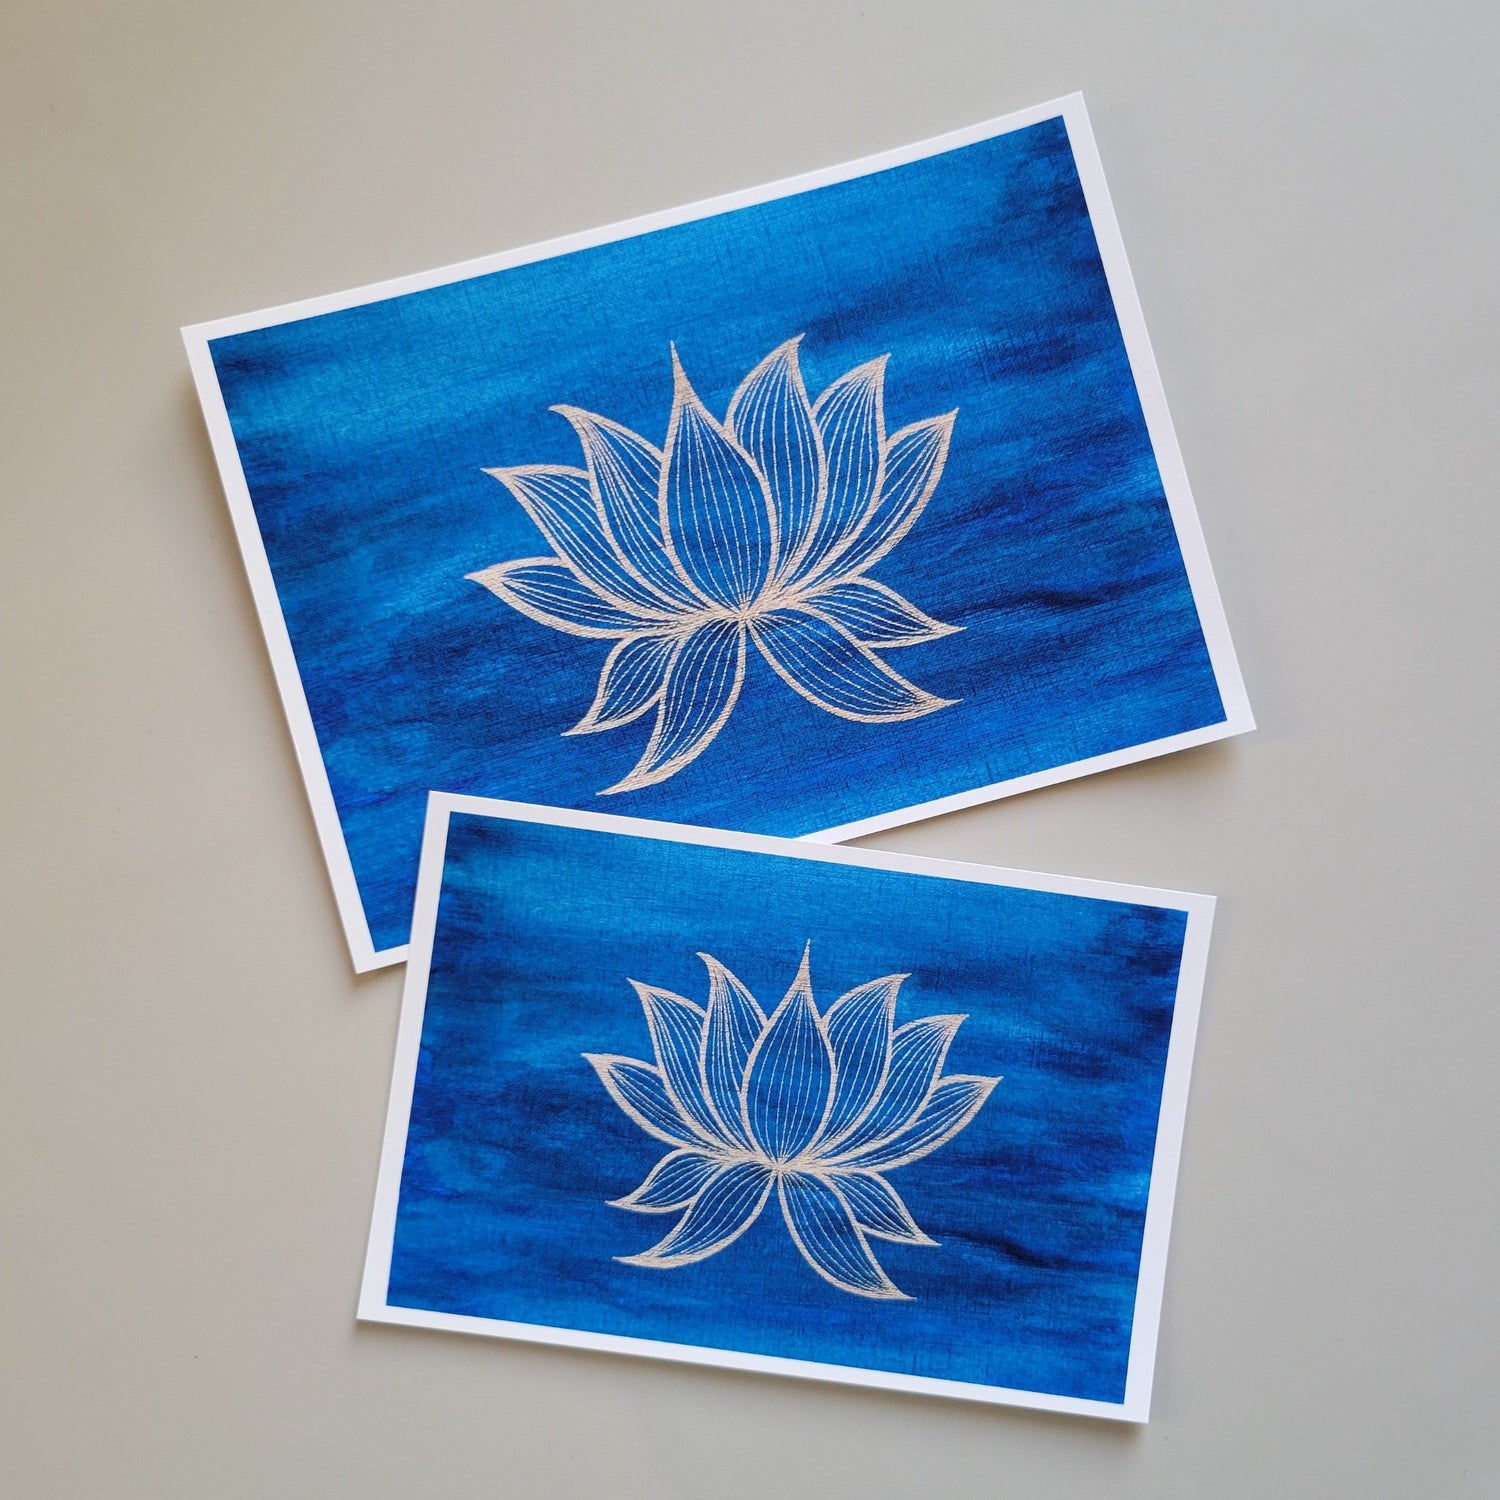 Botanical themed art print of a golden yellow lotus blossom against a deep blue background with hints of green. Image adapted from original painting. Delicate details set against a bold background, in a strong yet serene atmosphere. High quality print reproduction on specialty fine art printing paper.